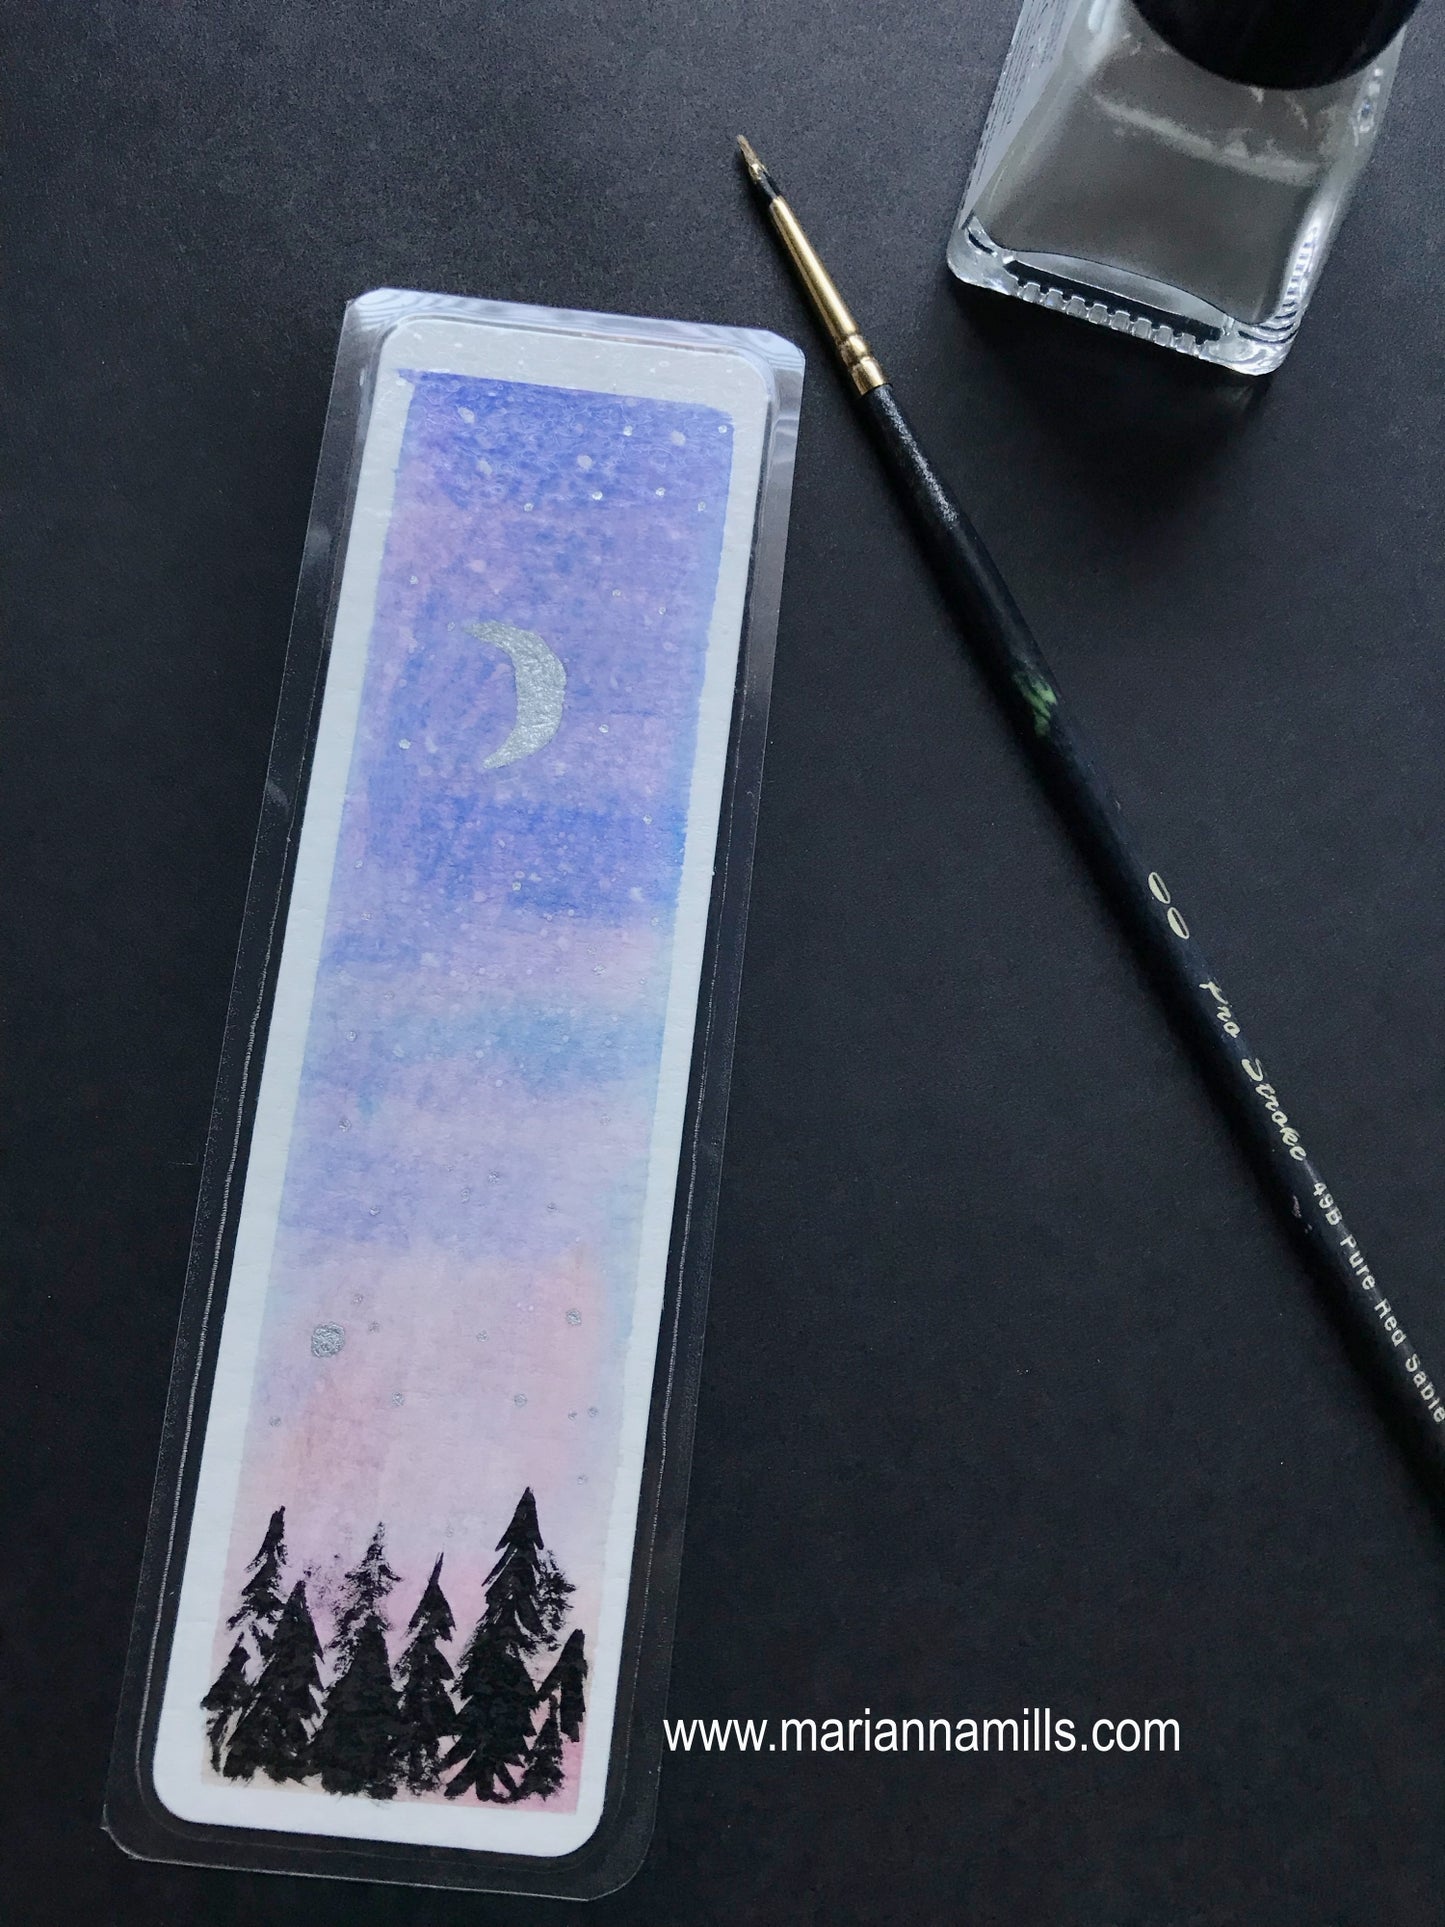 Original hand painted bookmark: starry night sky watercolor with silver details by Marianna Mills